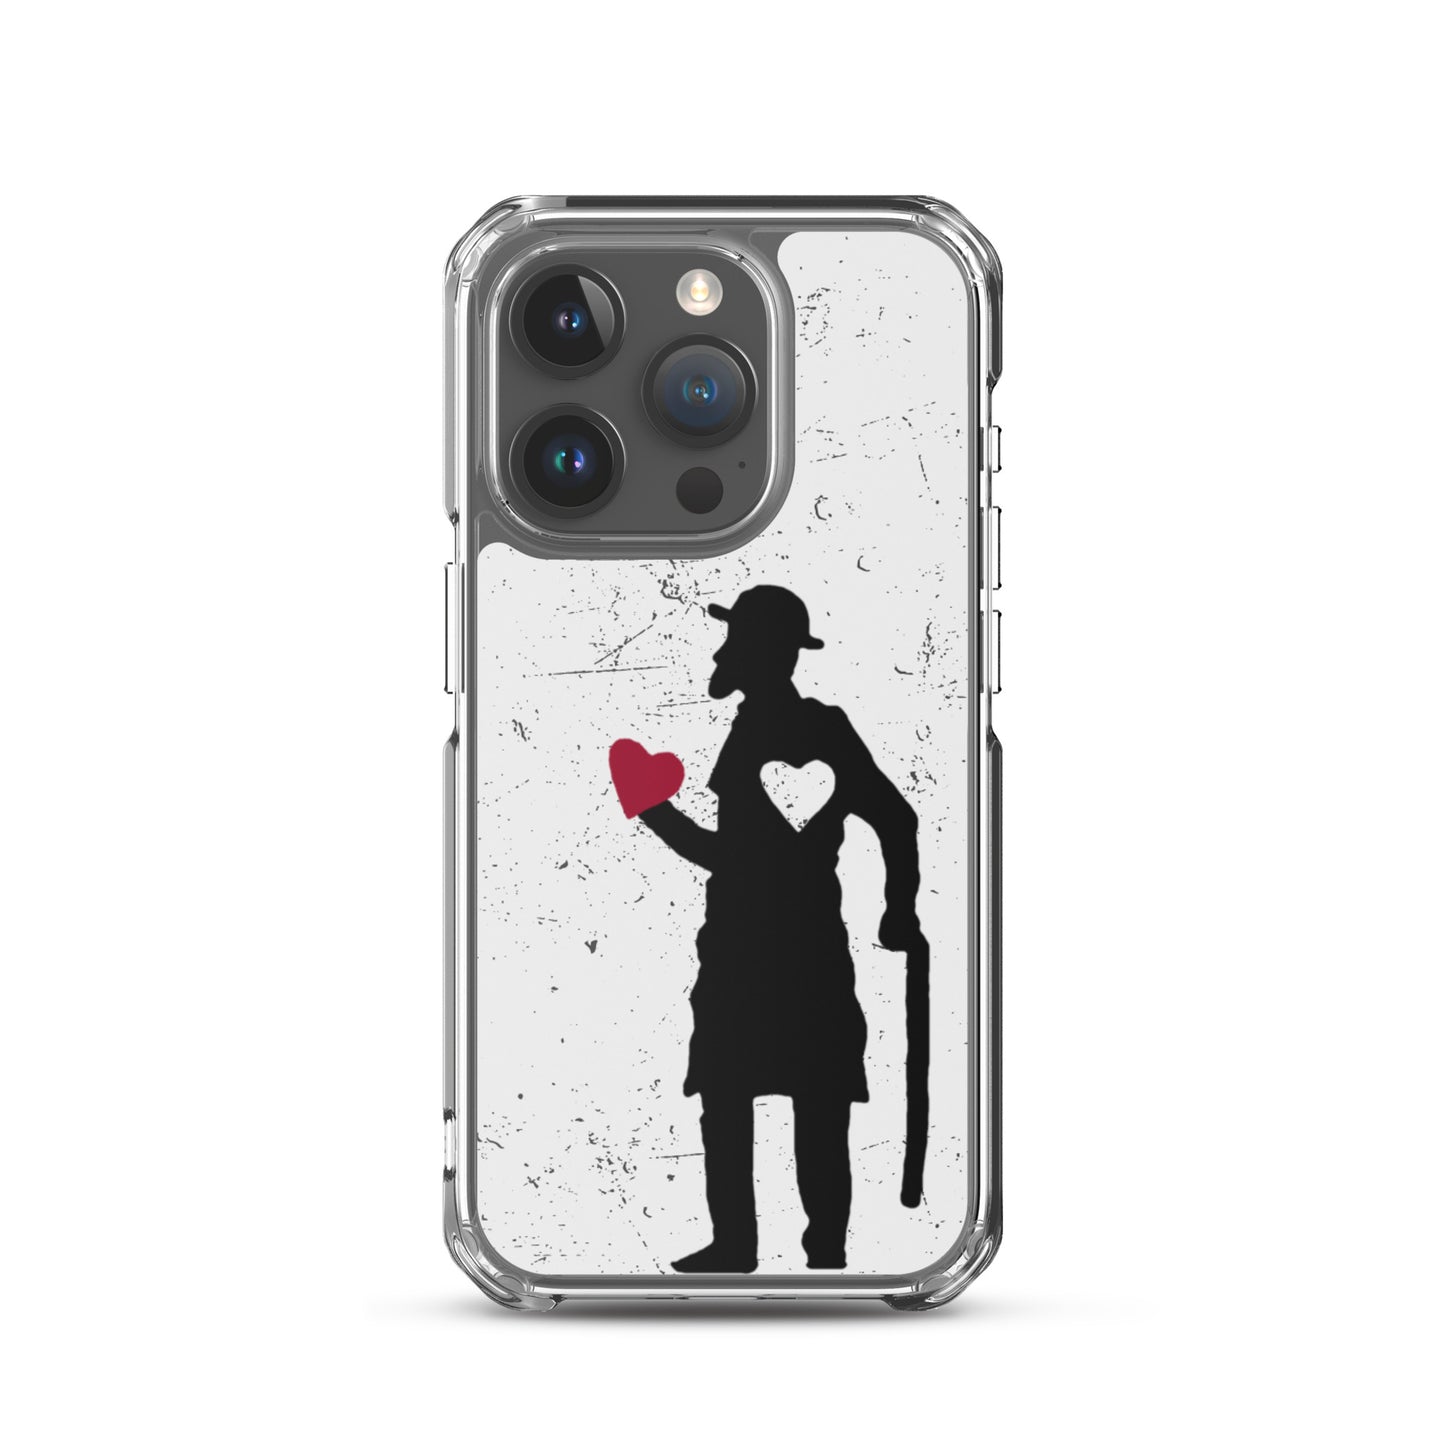 Take My Heart (iPhone Case)